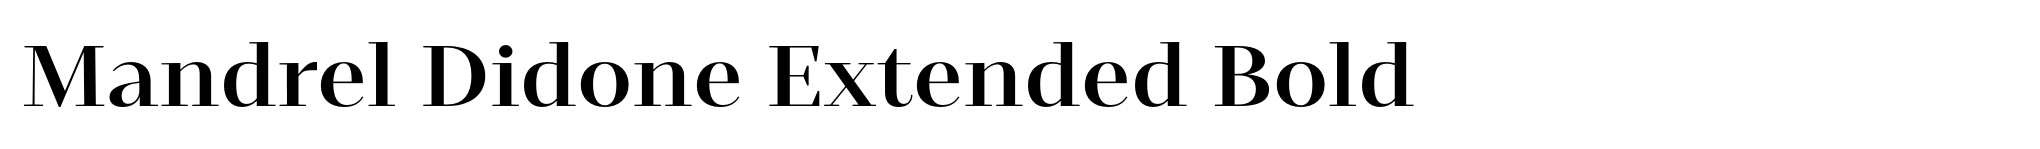 Mandrel Didone Extended Bold image